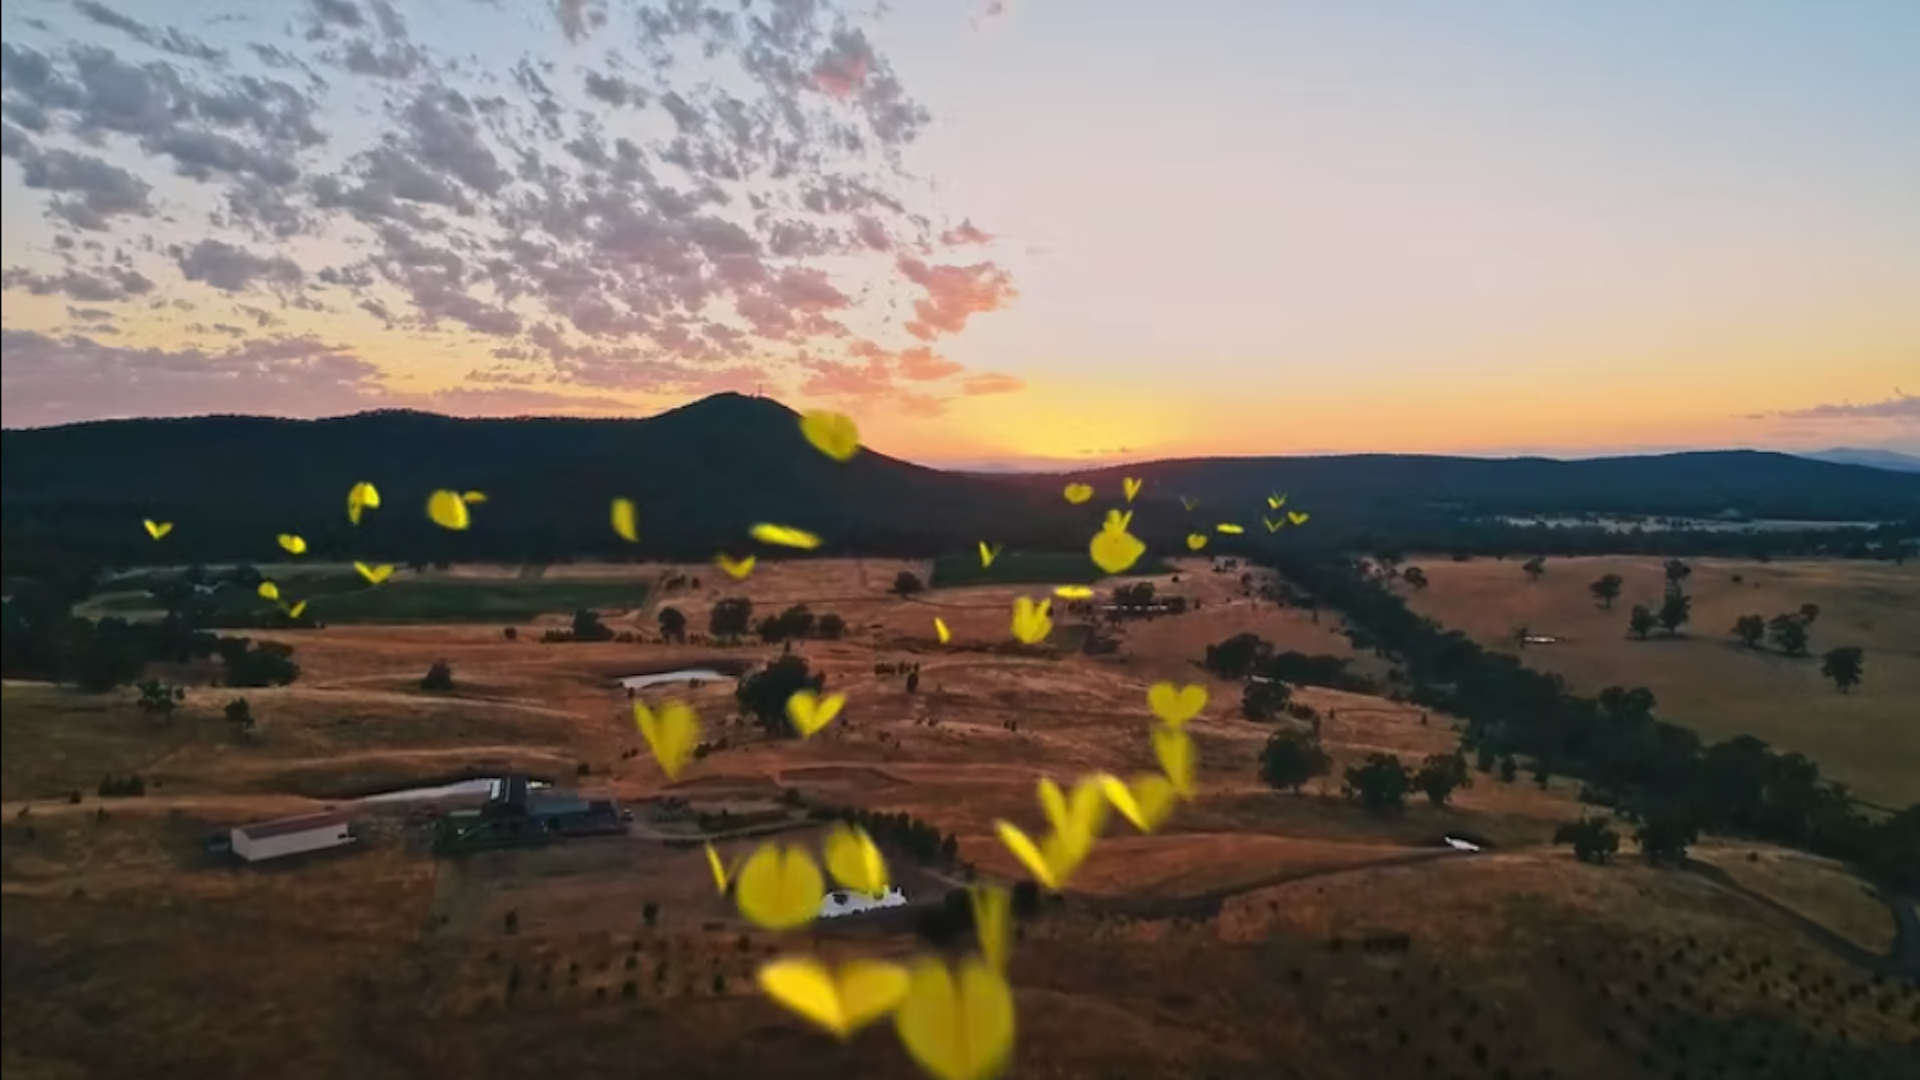 Still from the VANDAL produced Department ofHealth 'Care for your Health' TVC featuring a sunrise over the scenic Australian Countryside with yellow heart shaped butterflies moving across the frame